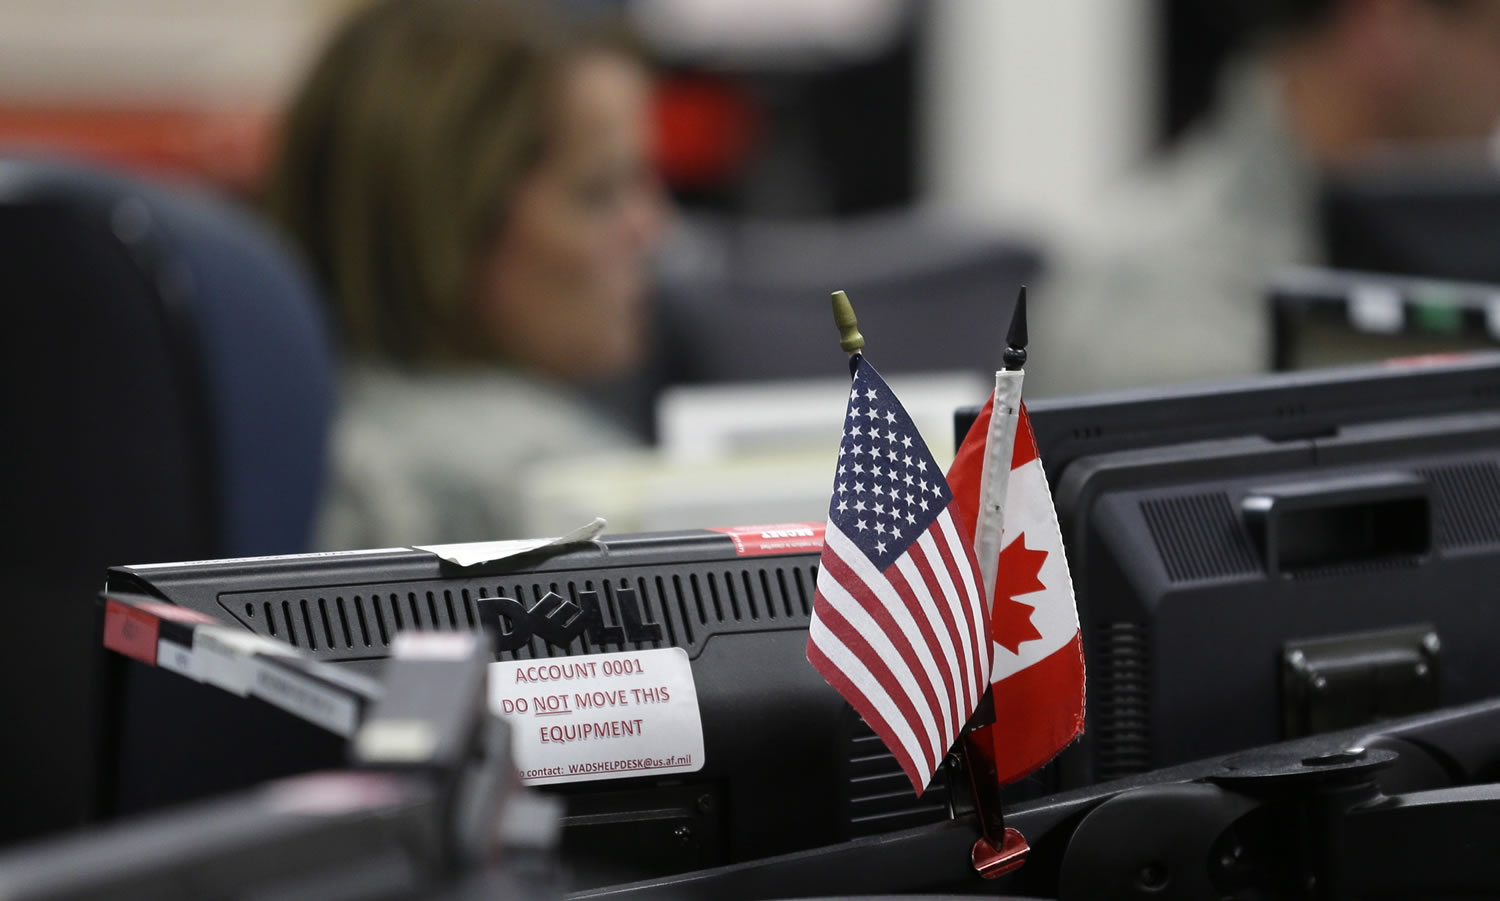 U.S. and Canadian flags are displayed near computer monitors at the Western Air Defense Sector at Joint Base Lewis-McChord in Washington state.